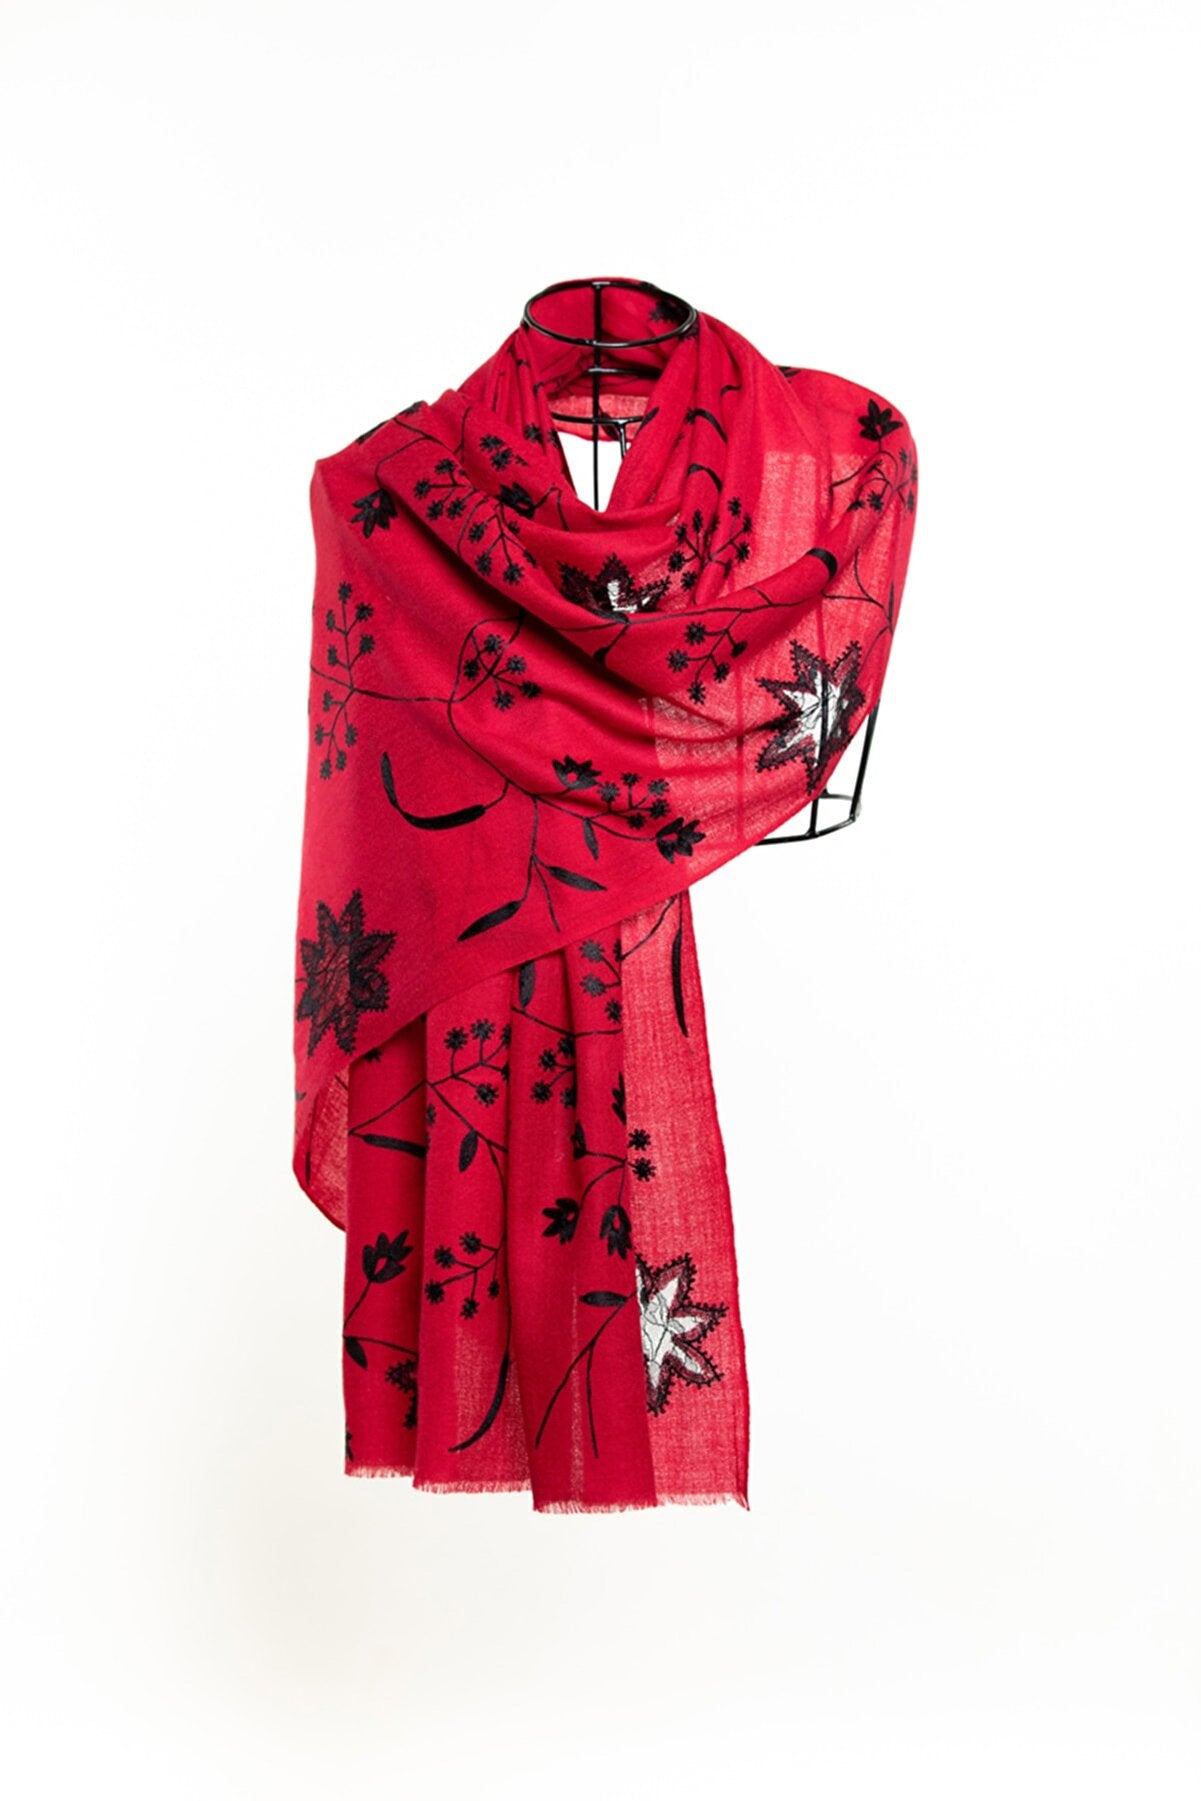 Lace & Embroidery Floral Sheer Shawl - Red Black